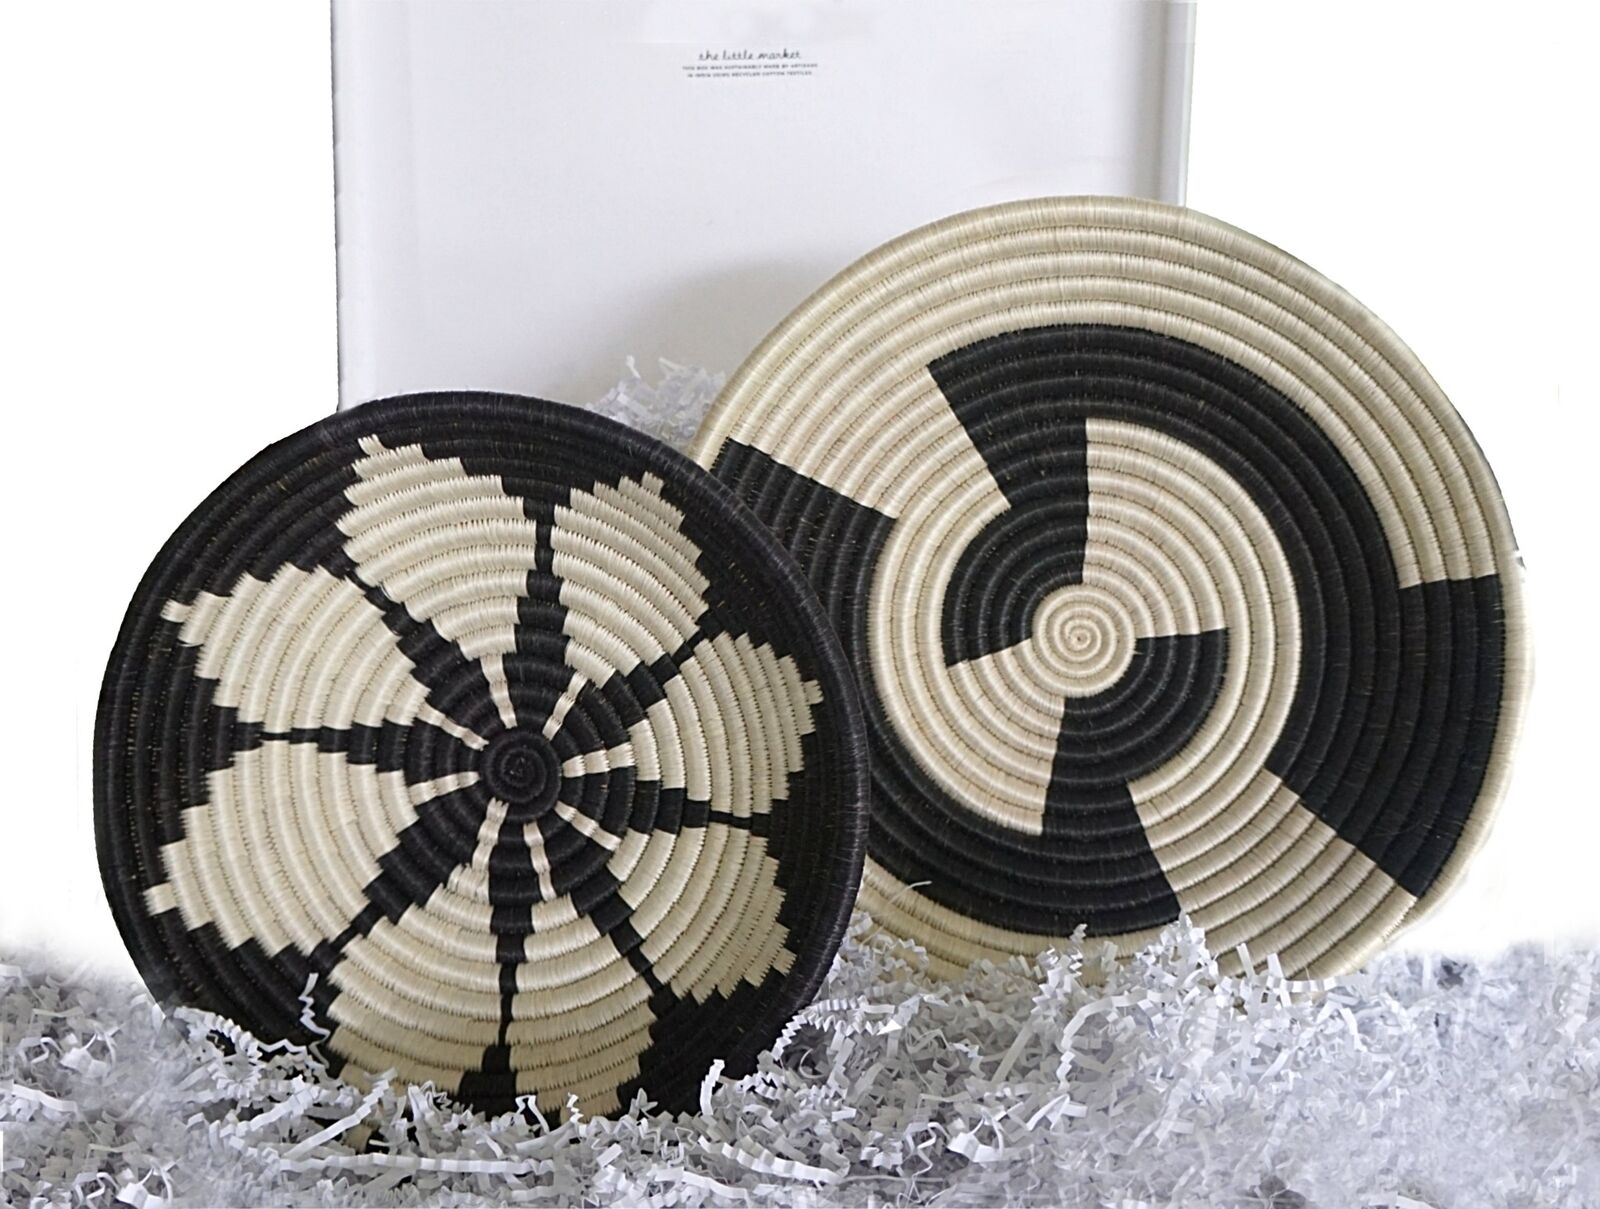 FAIR TRADE Pair of EAST AFRICAN Handwoven Rattan Baskets in Black and White NIB